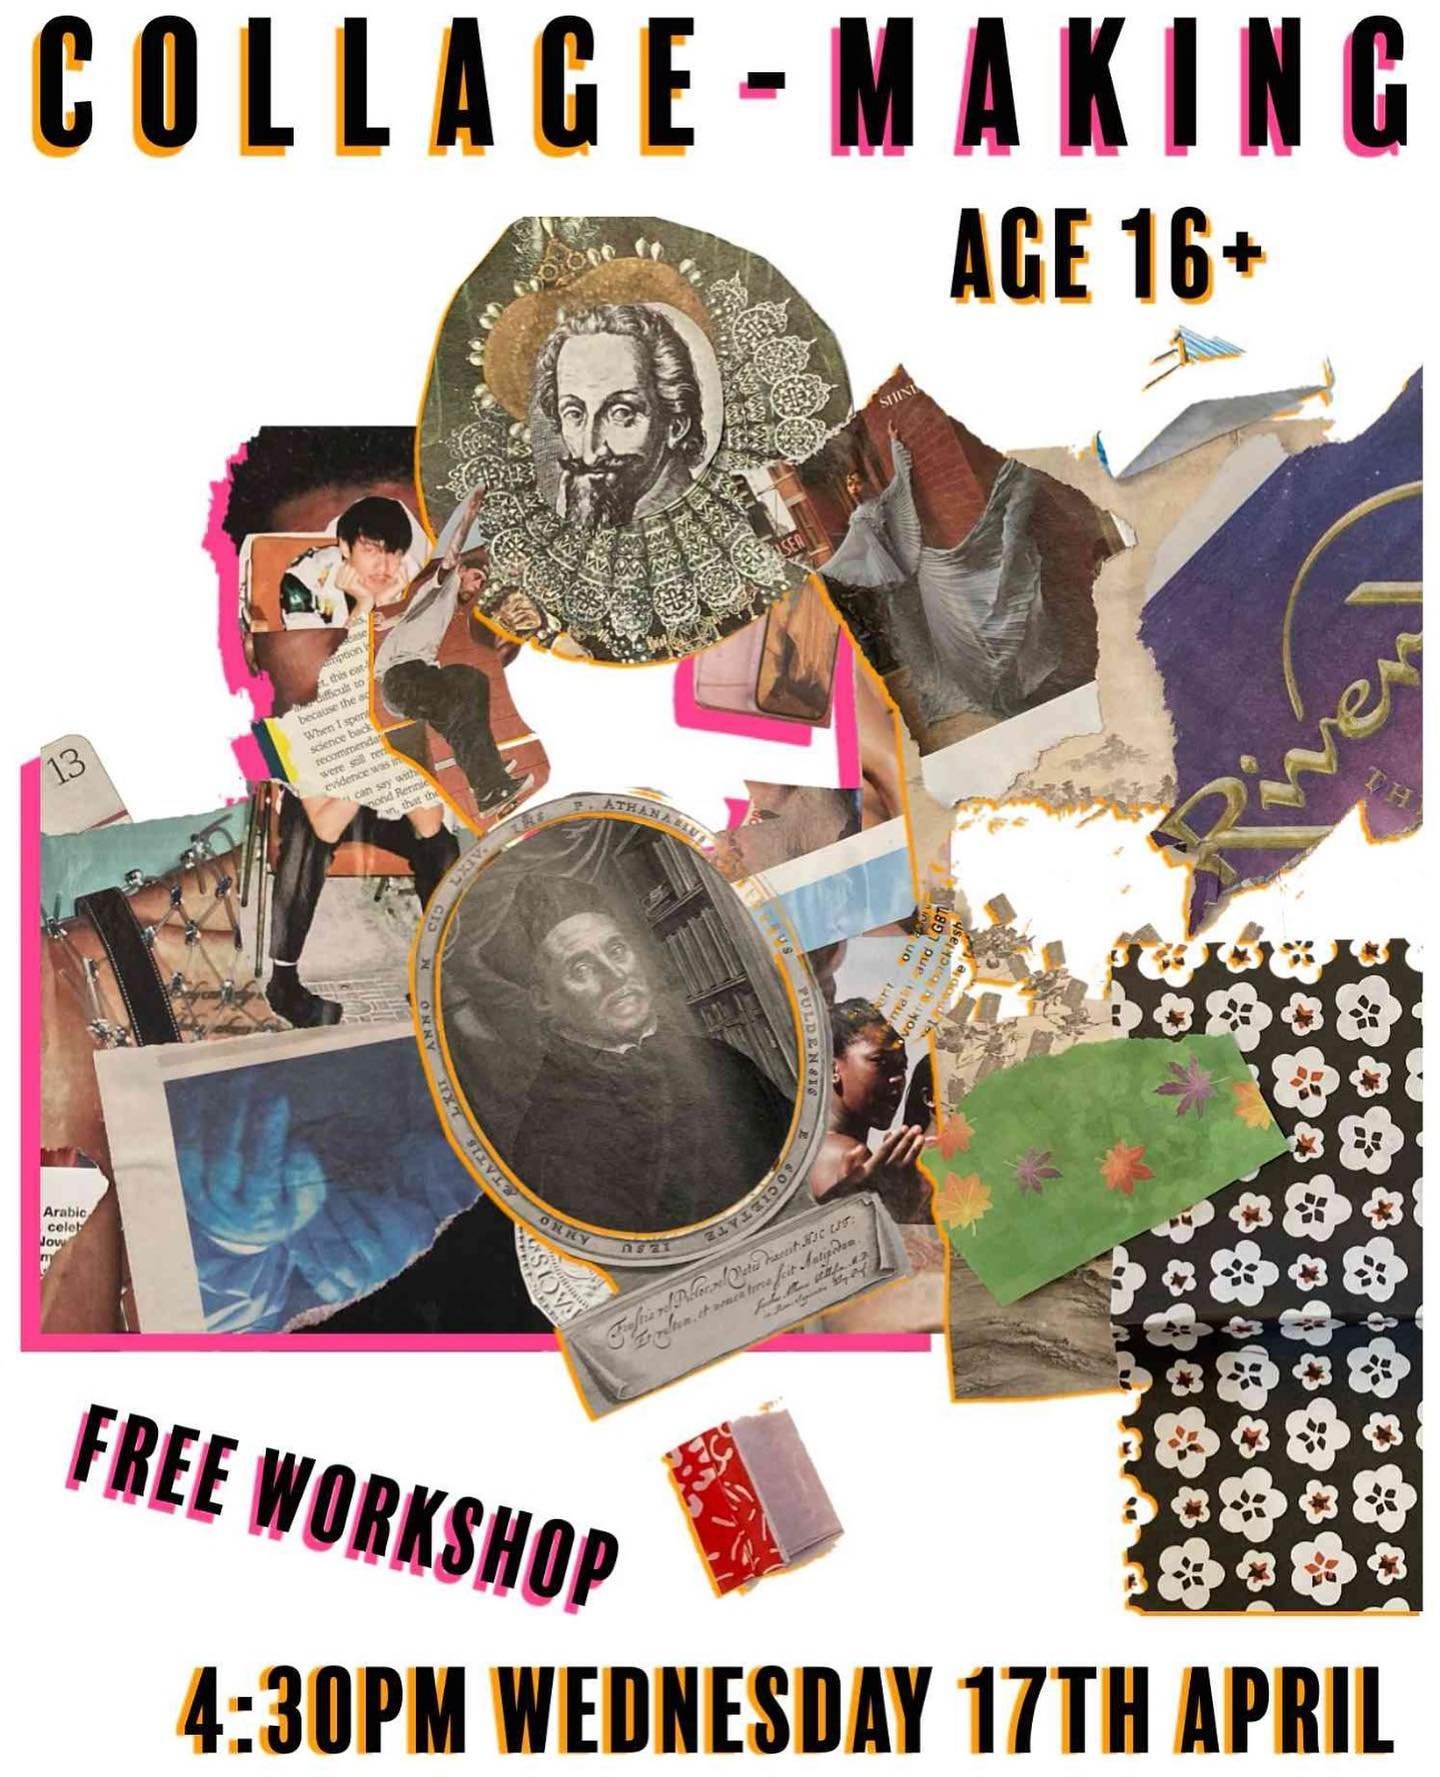 Join us tomorrow, 4:30-6:30pm, for a free arts workshop in which we&rsquo;ll make collages. Collage-making is a fun creative art form that allows you to experiment with different materials to visually express your ideas. 
The workshop is suitable for